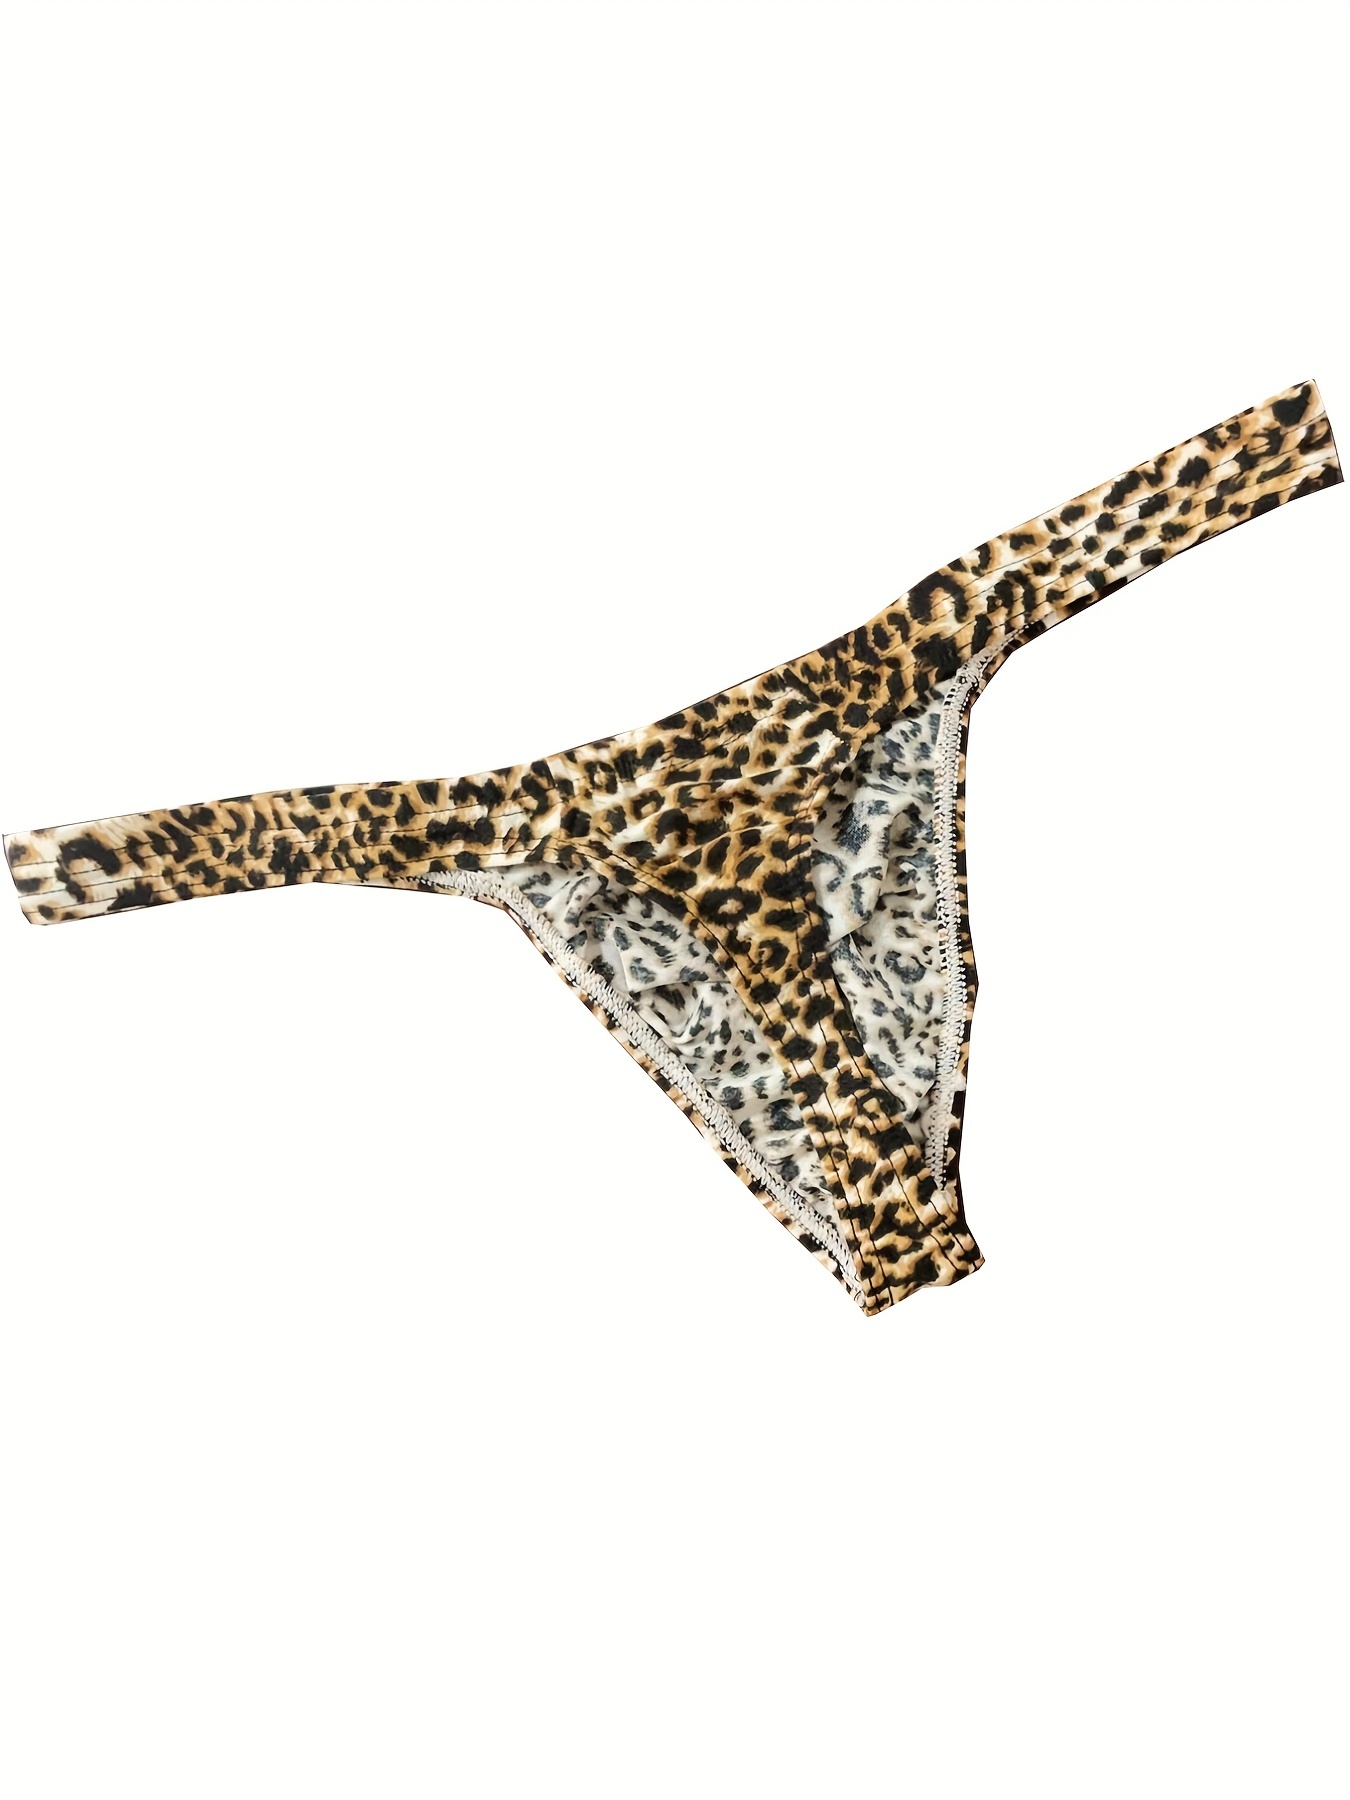 Funny Animal Print Women Briefs Novelty Sexy Hipster Panties Casual Lace  Edge Underwear